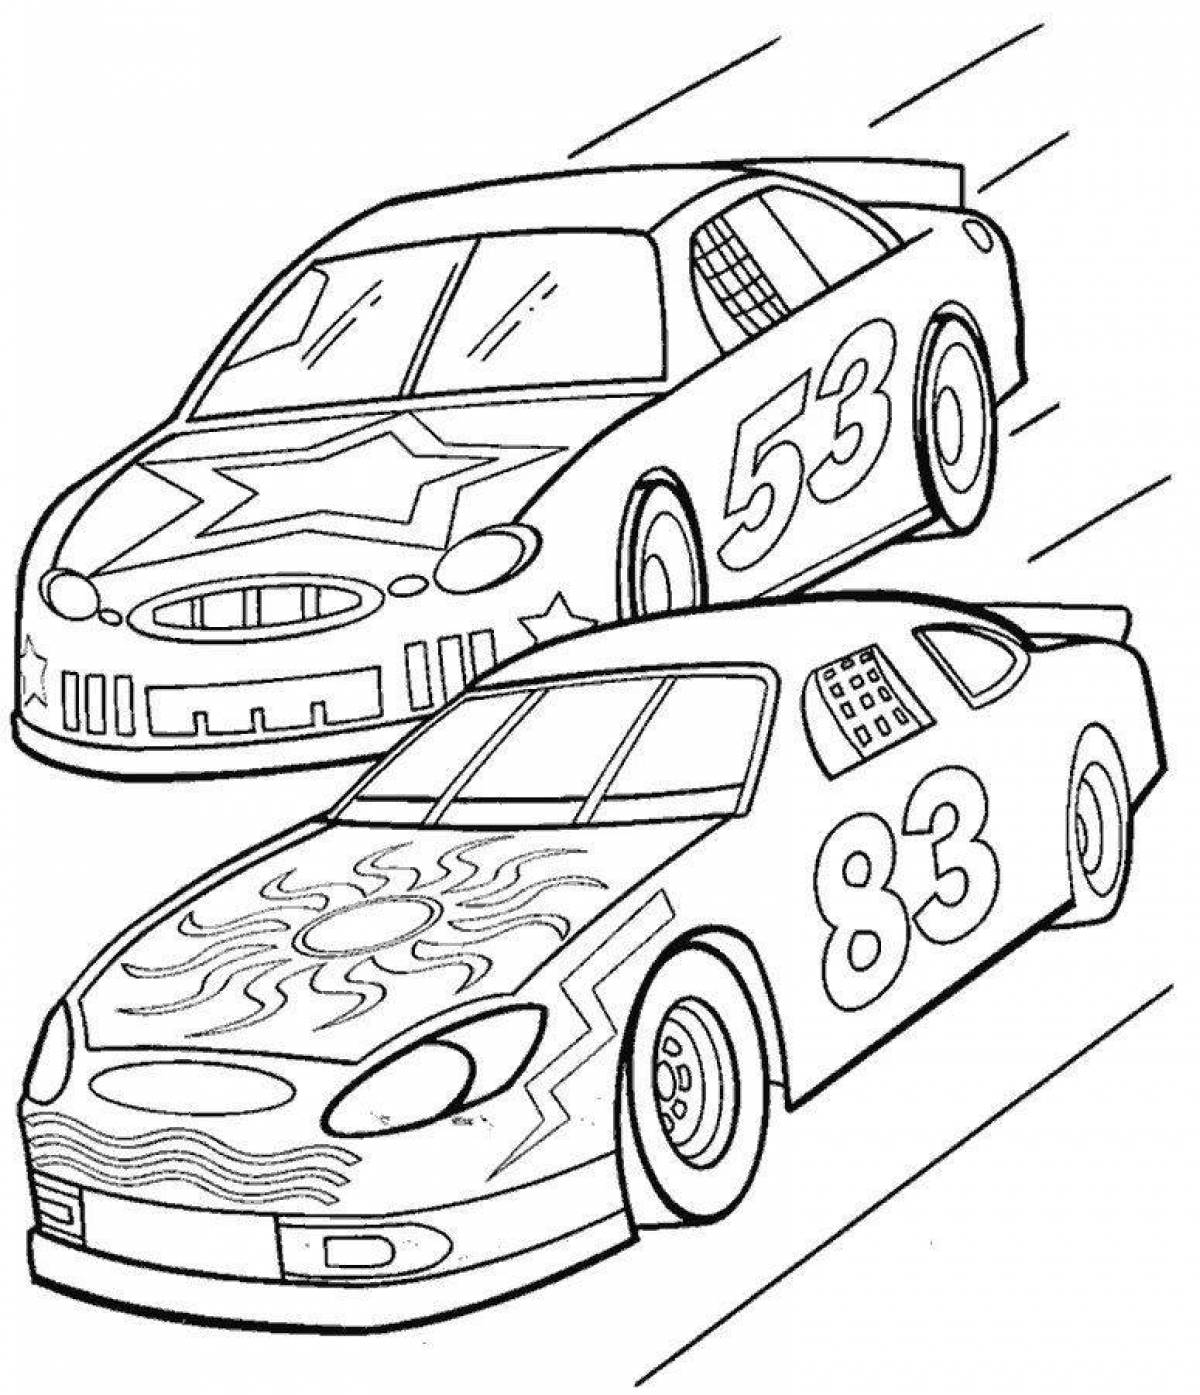 Great car coloring book for 10 year old boys